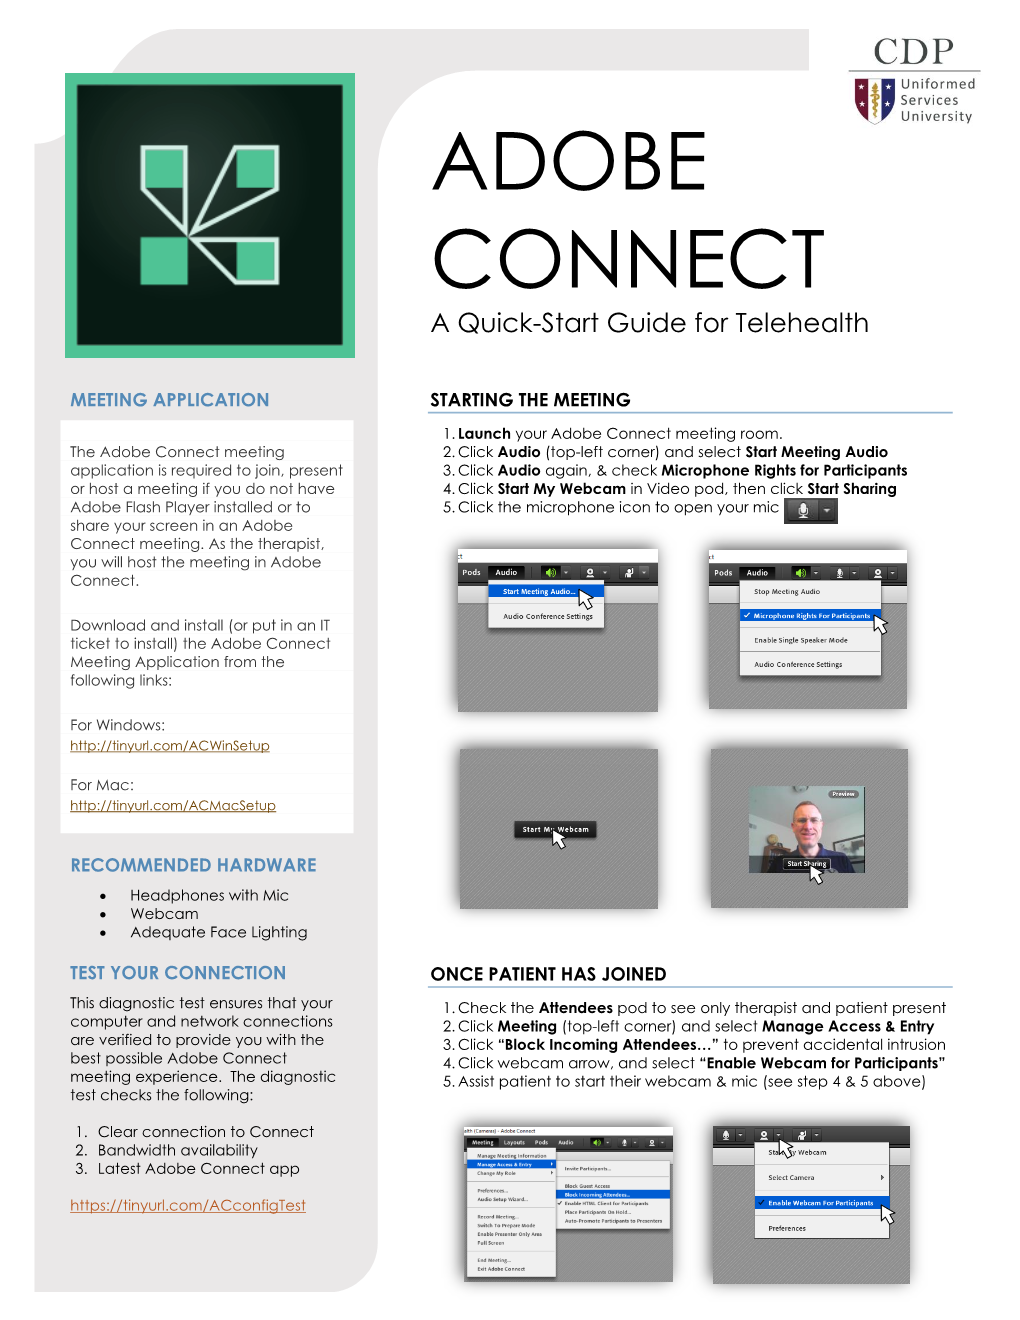 ADOBE CONNECT a Quick-Start Guide for Telehealth